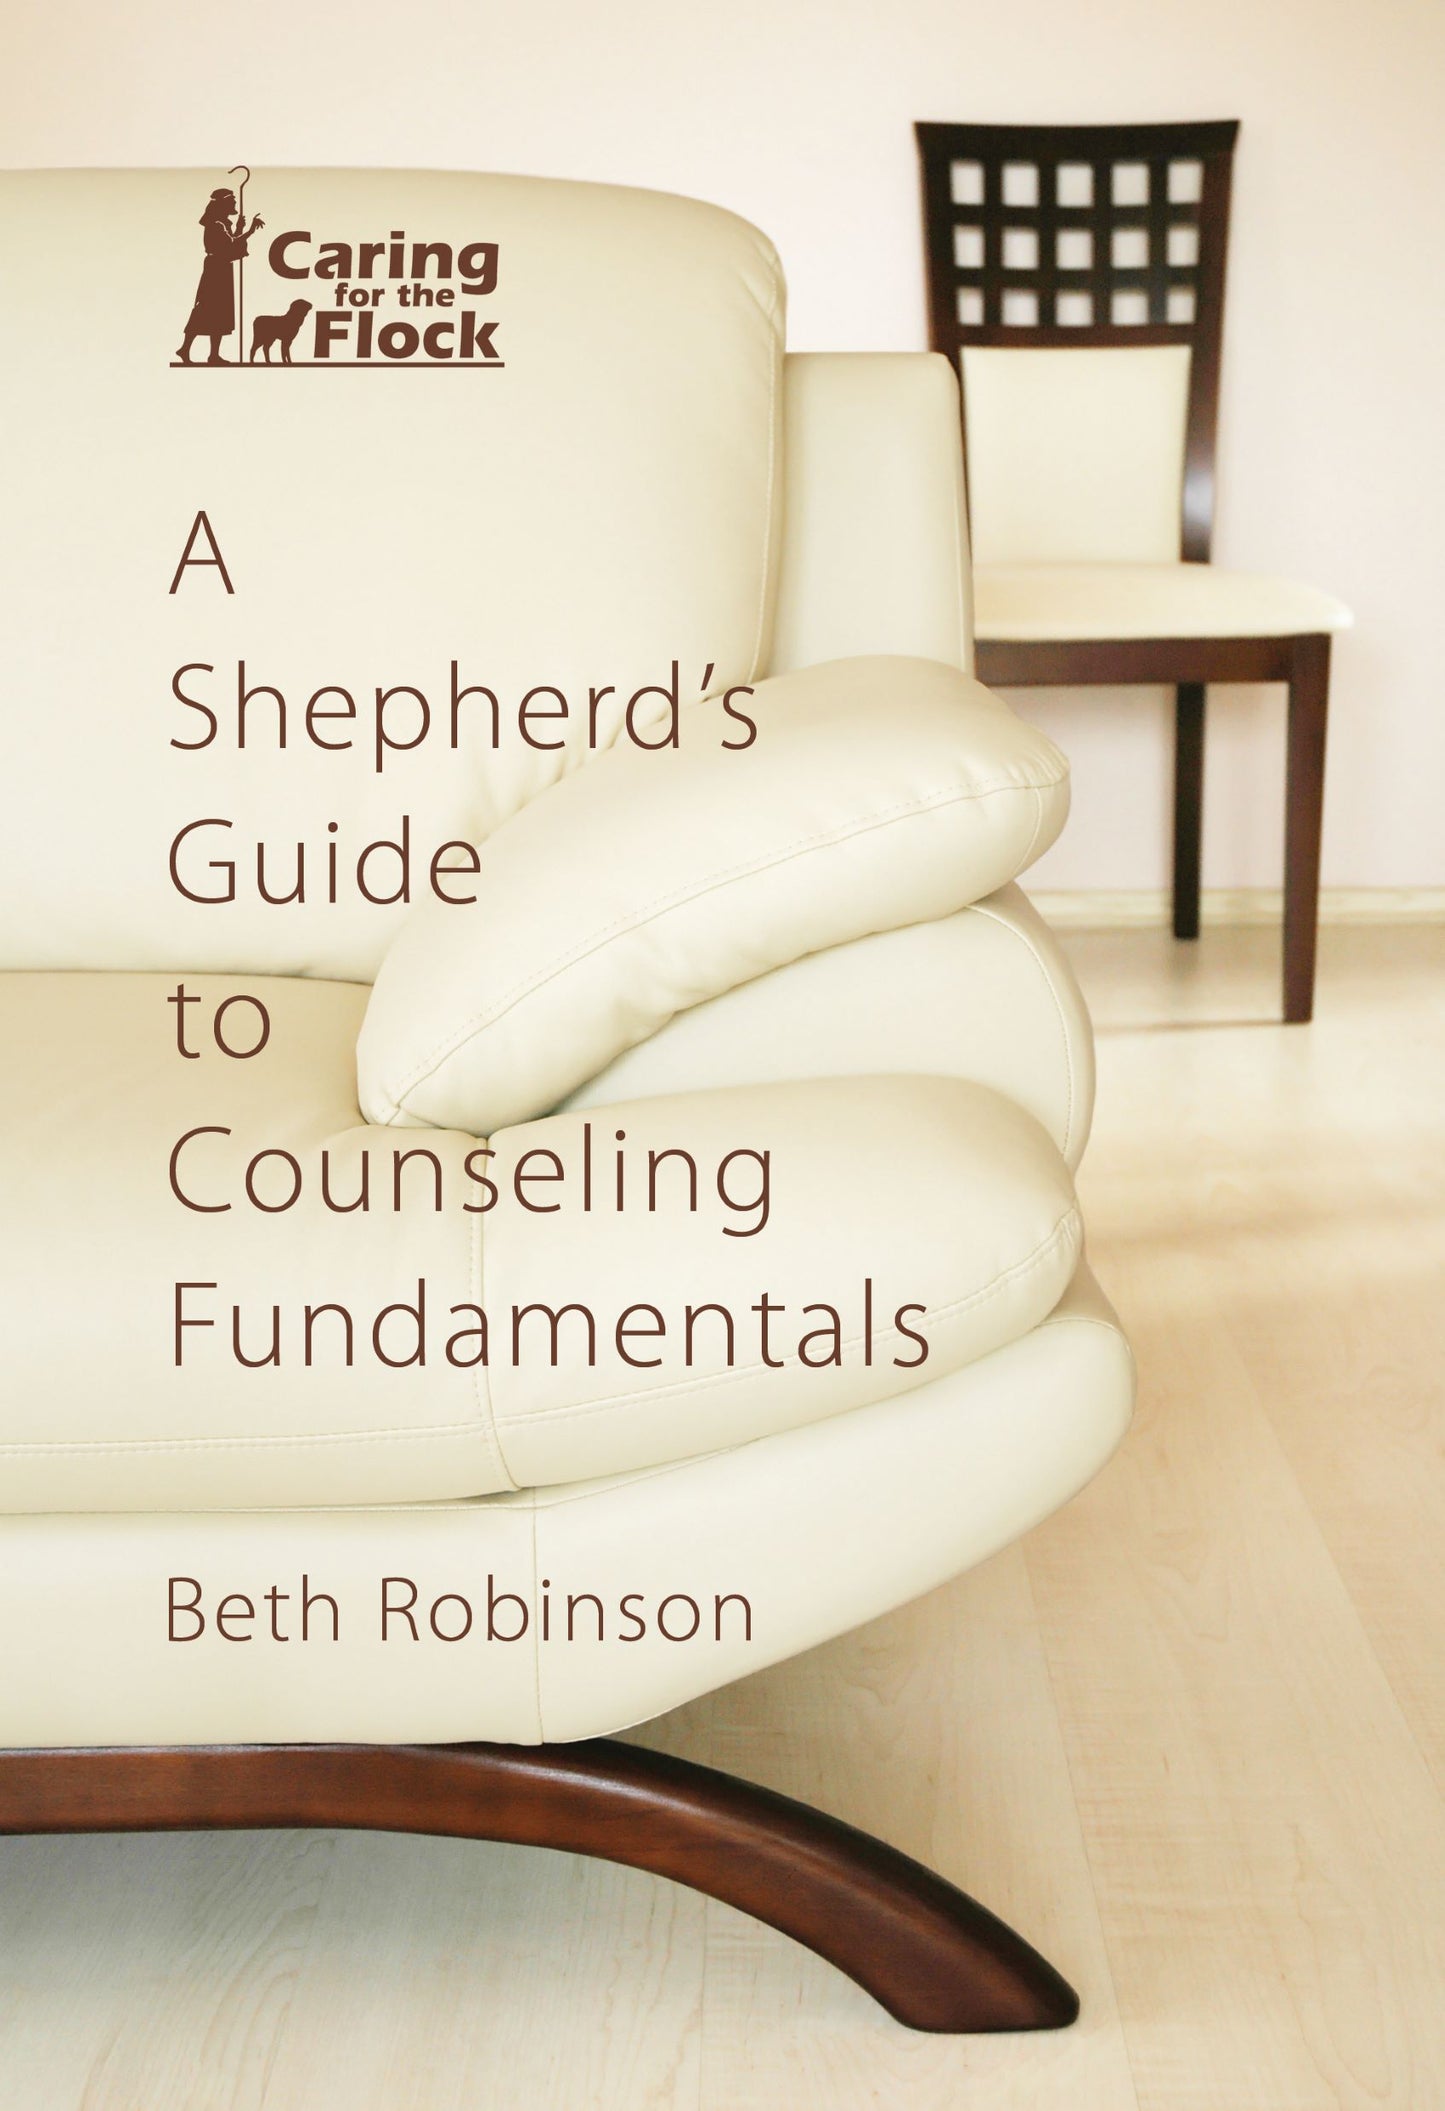 A Shepherd’s Guide to Counseling Fundamentals